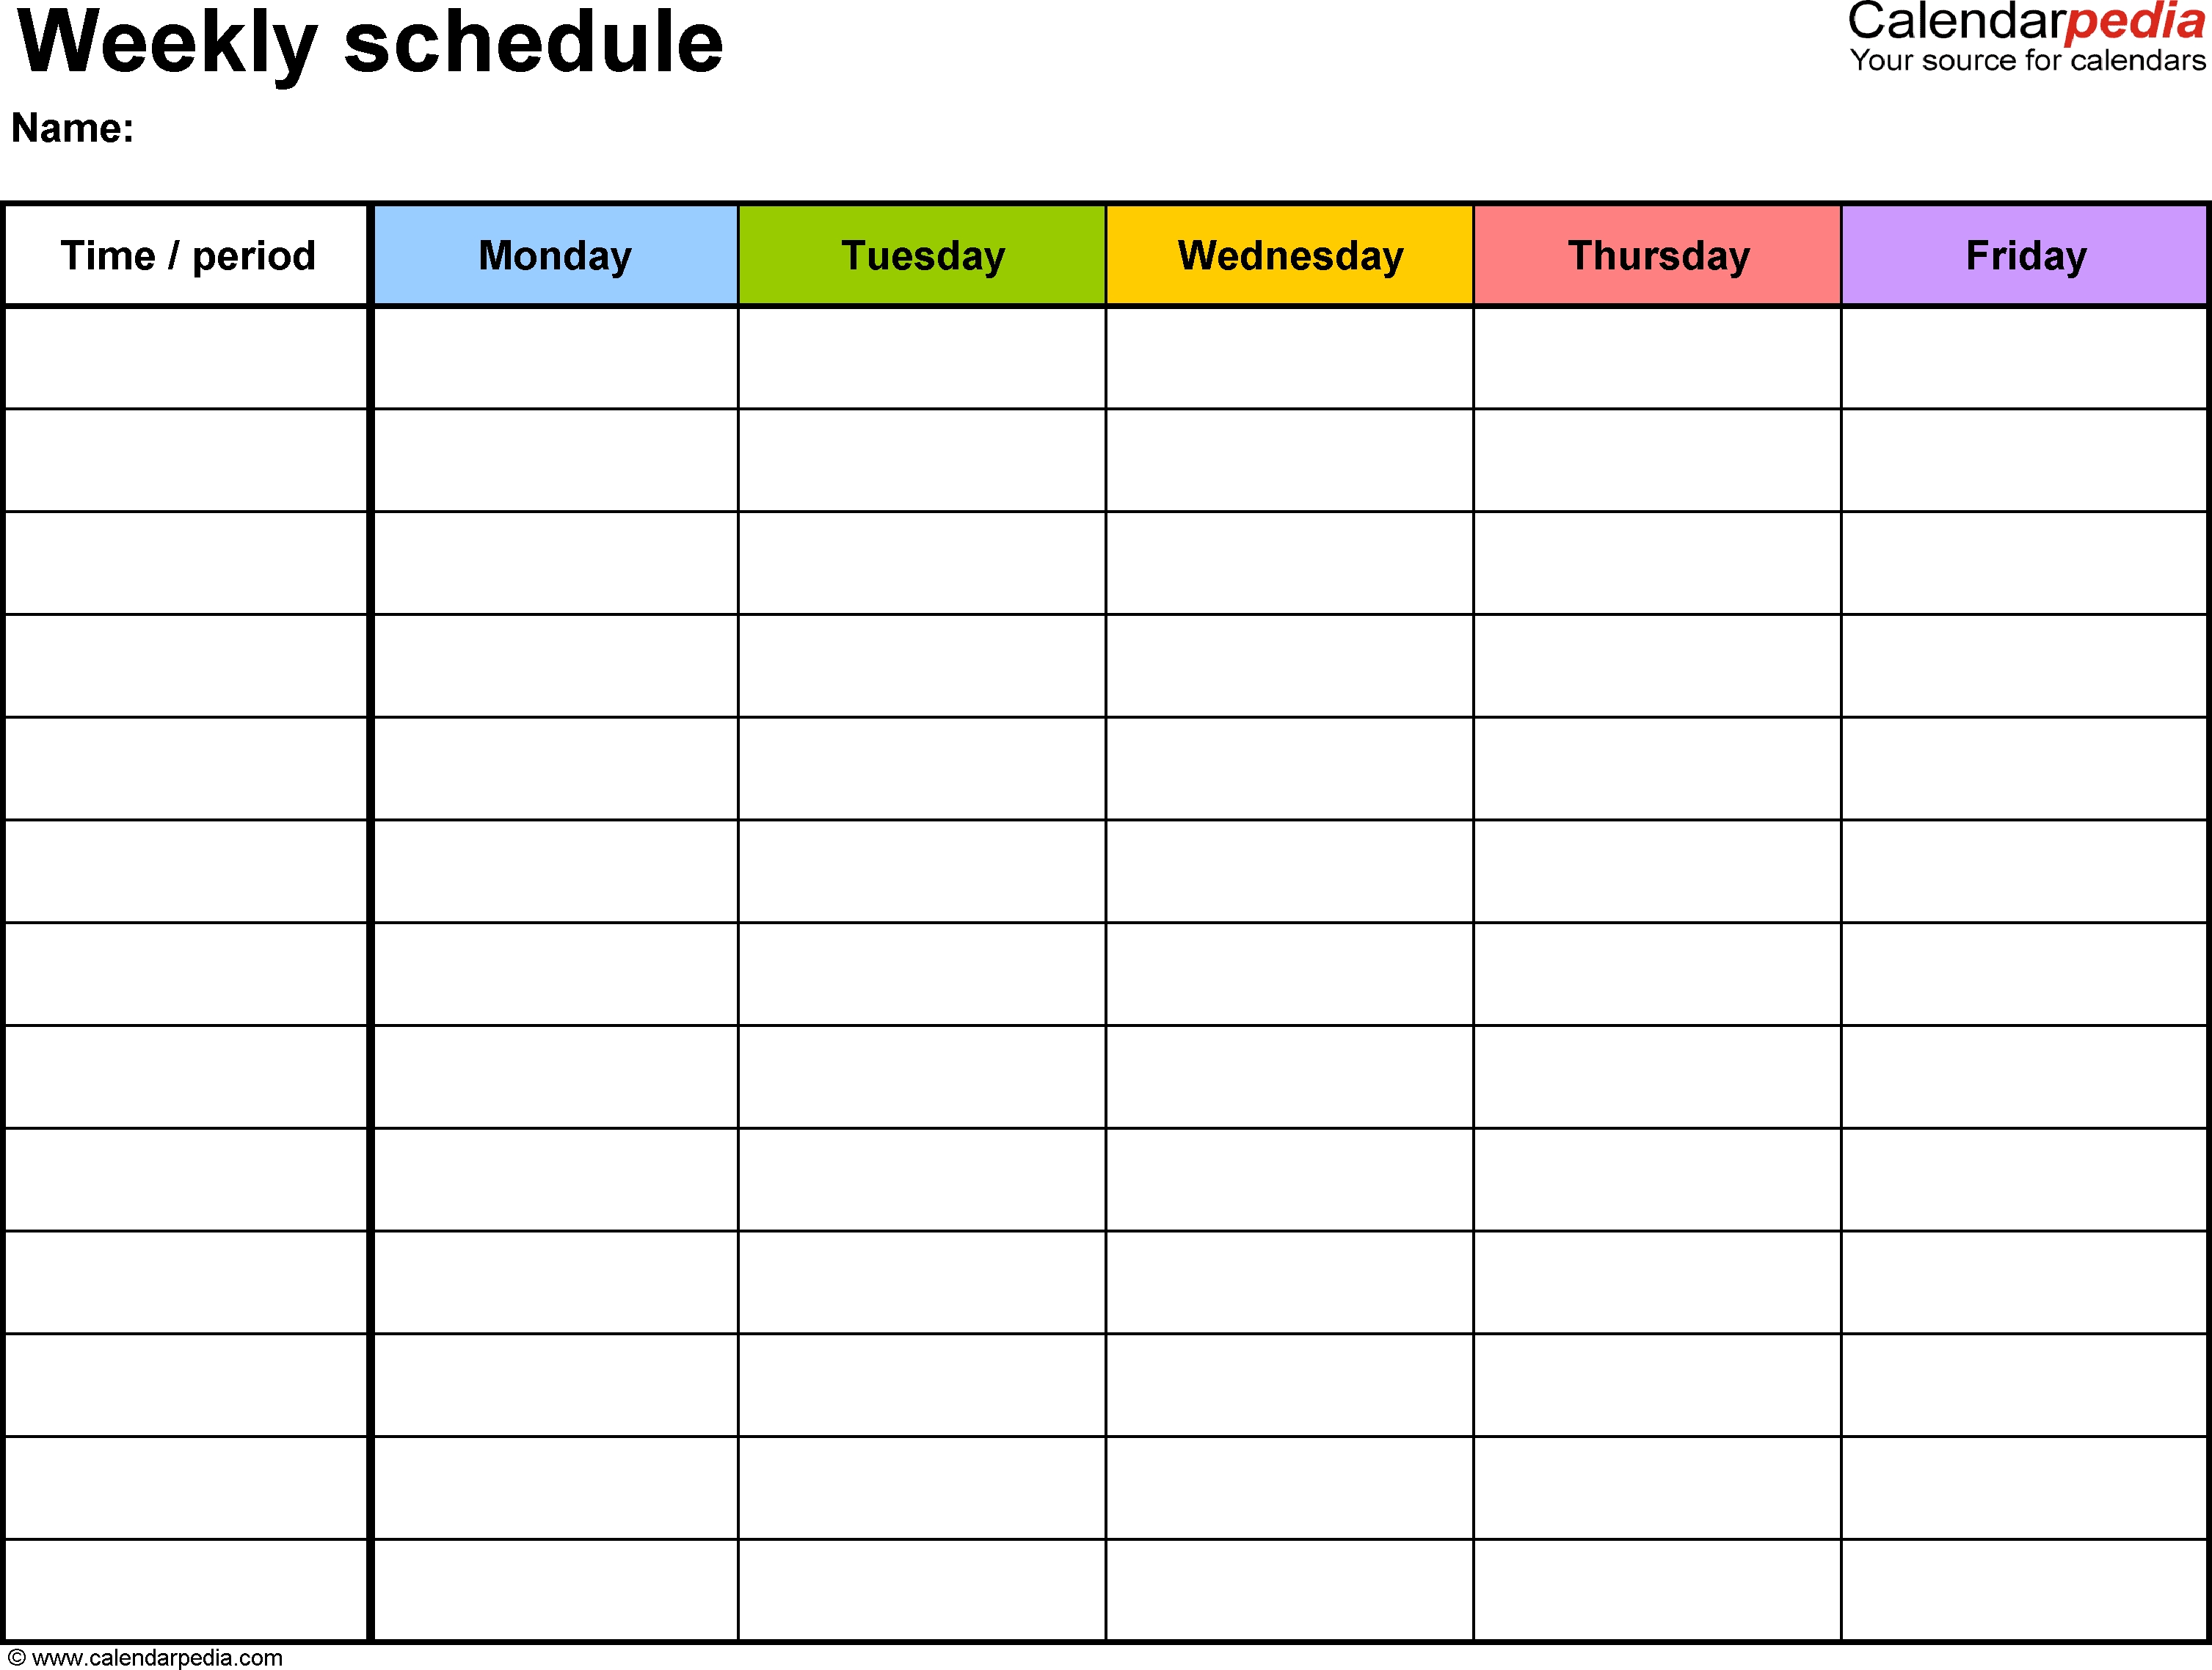 Free Weekly Schedule Templates For Word - 18 Templates intended for Free Monday Through Friday Calendar Template